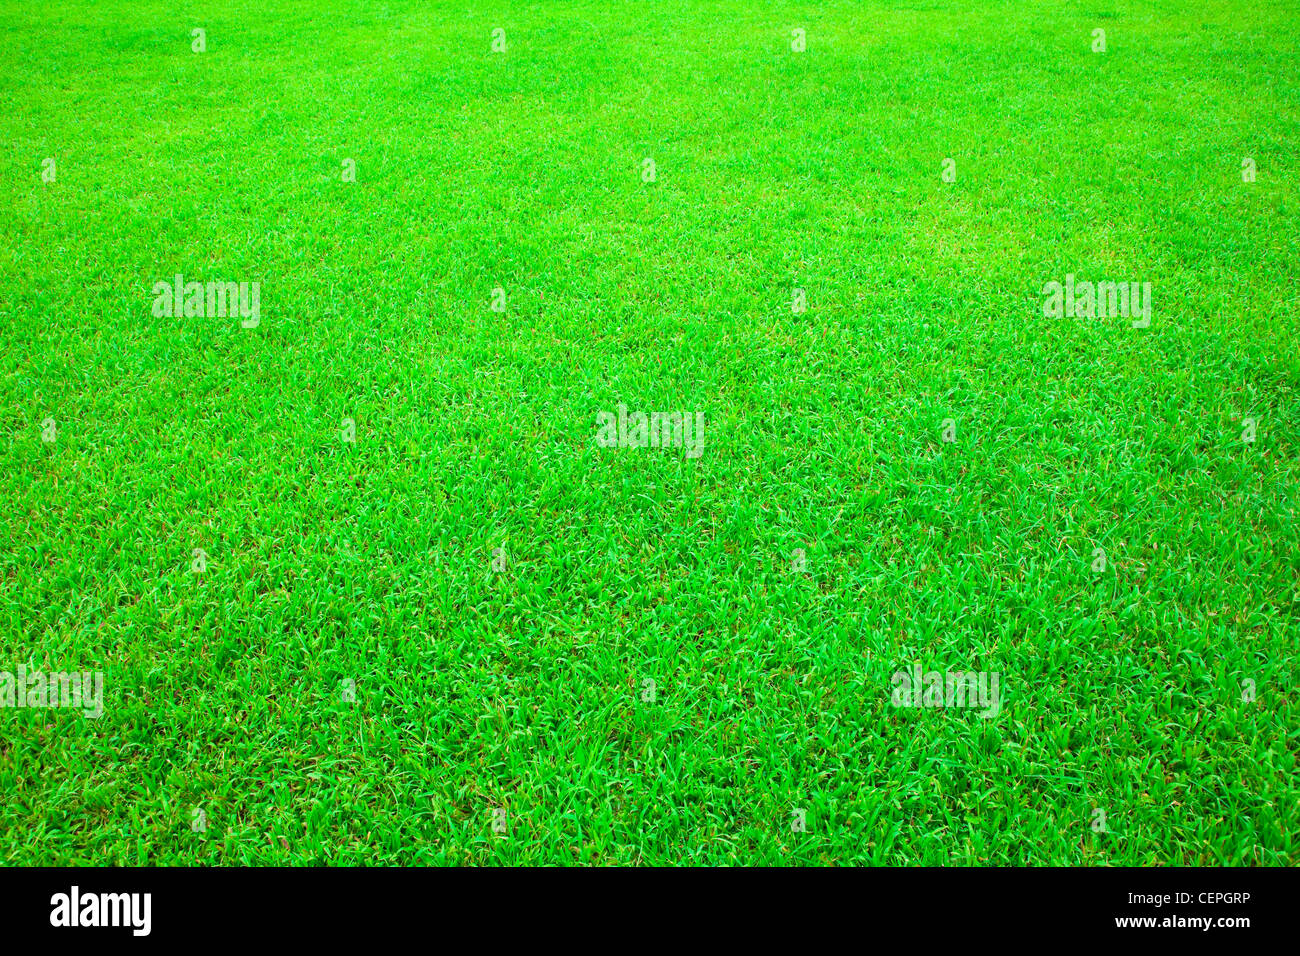 Green Grass Full Screen Wallpaper Background Stock Photo Alamy,How To Grill Tuna Belly